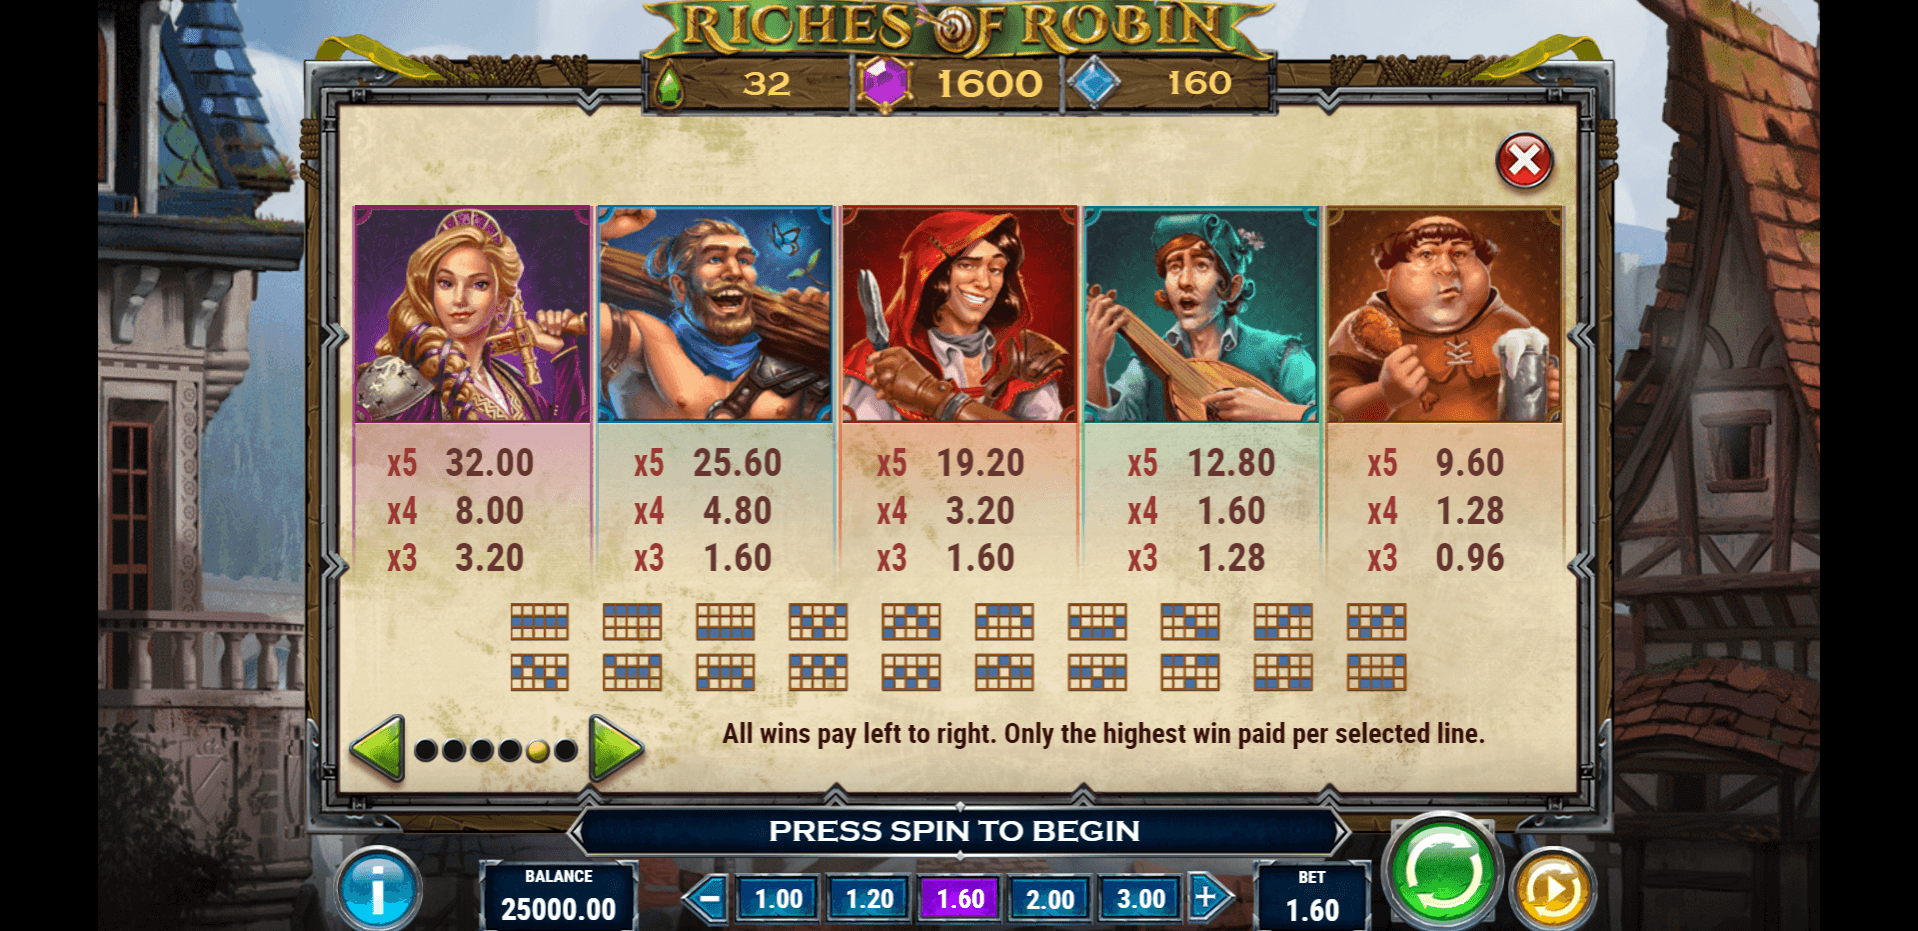 riches of robin slot machine detail image 4